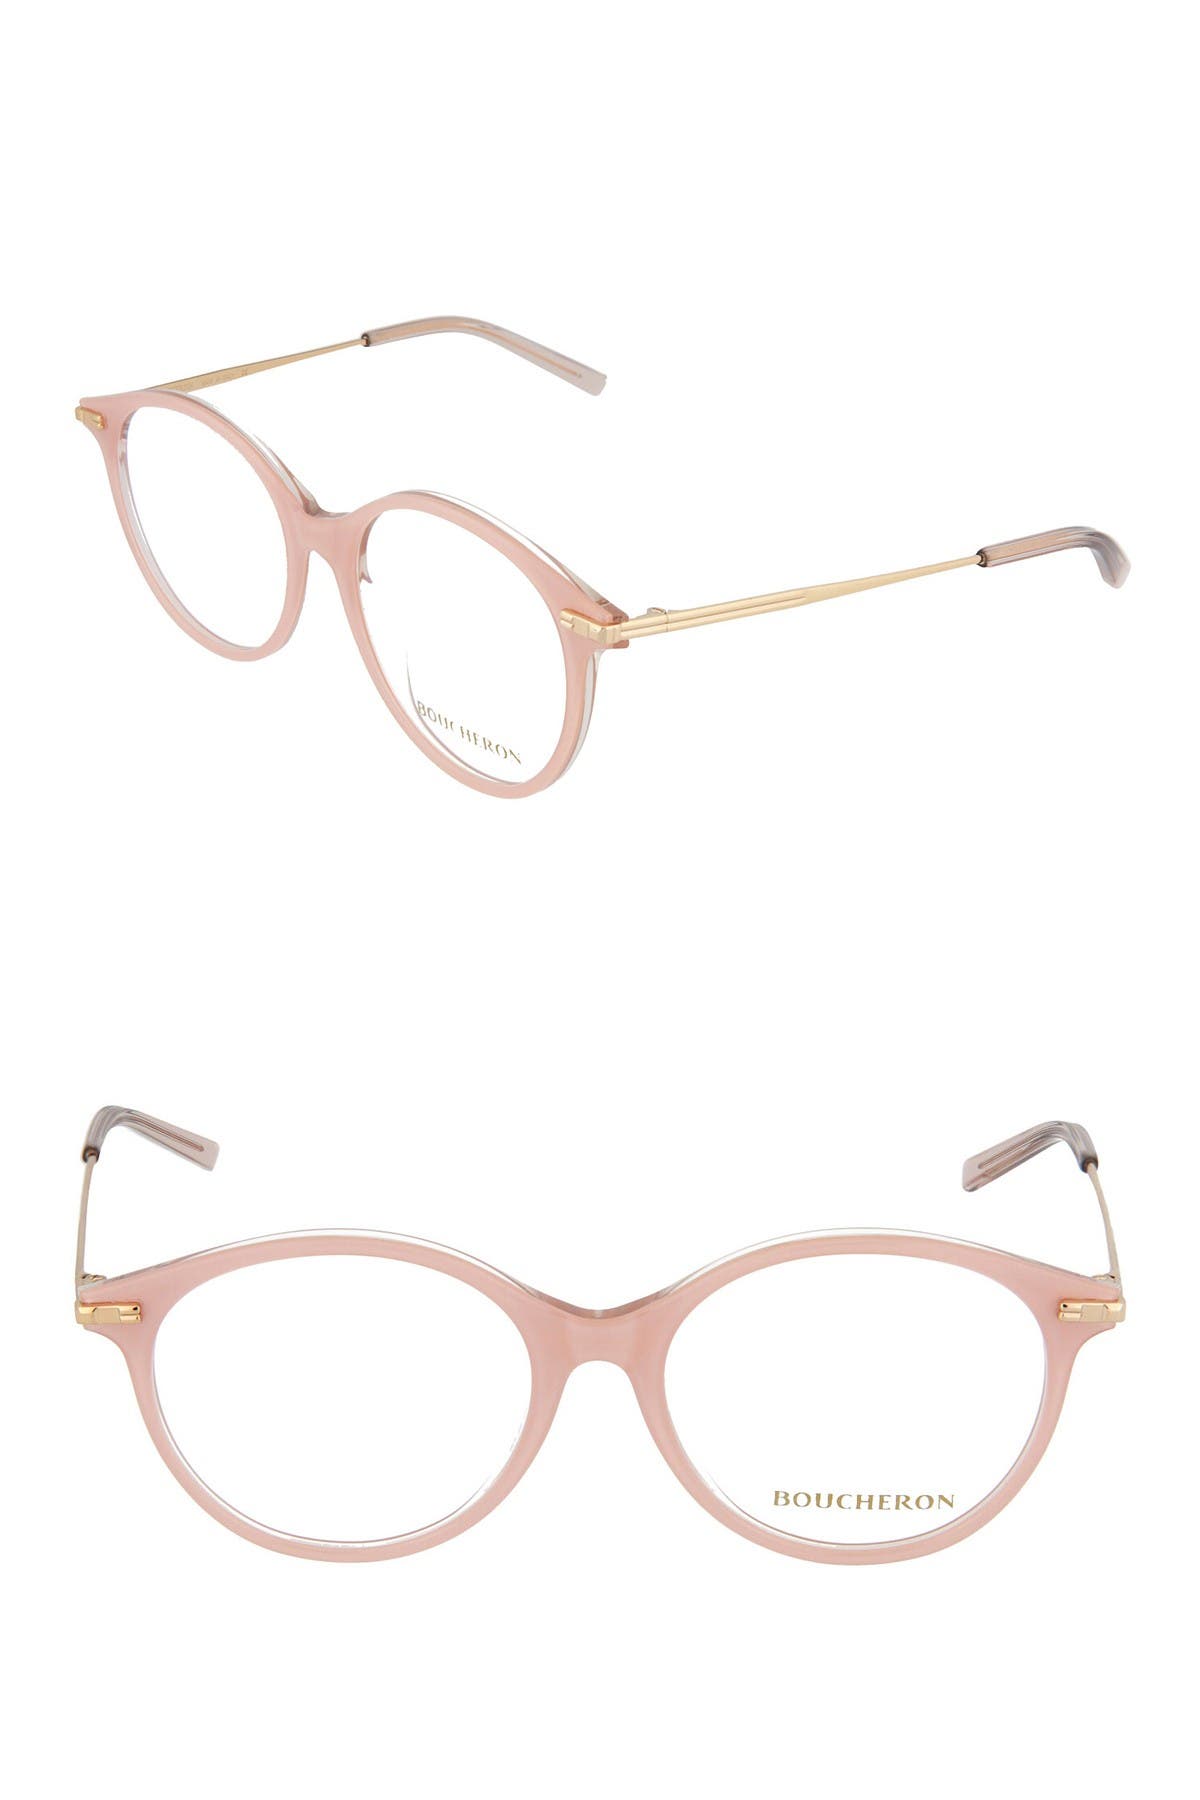 Boucheron 53mm Round Optical Frames In Nude Gold Transparent